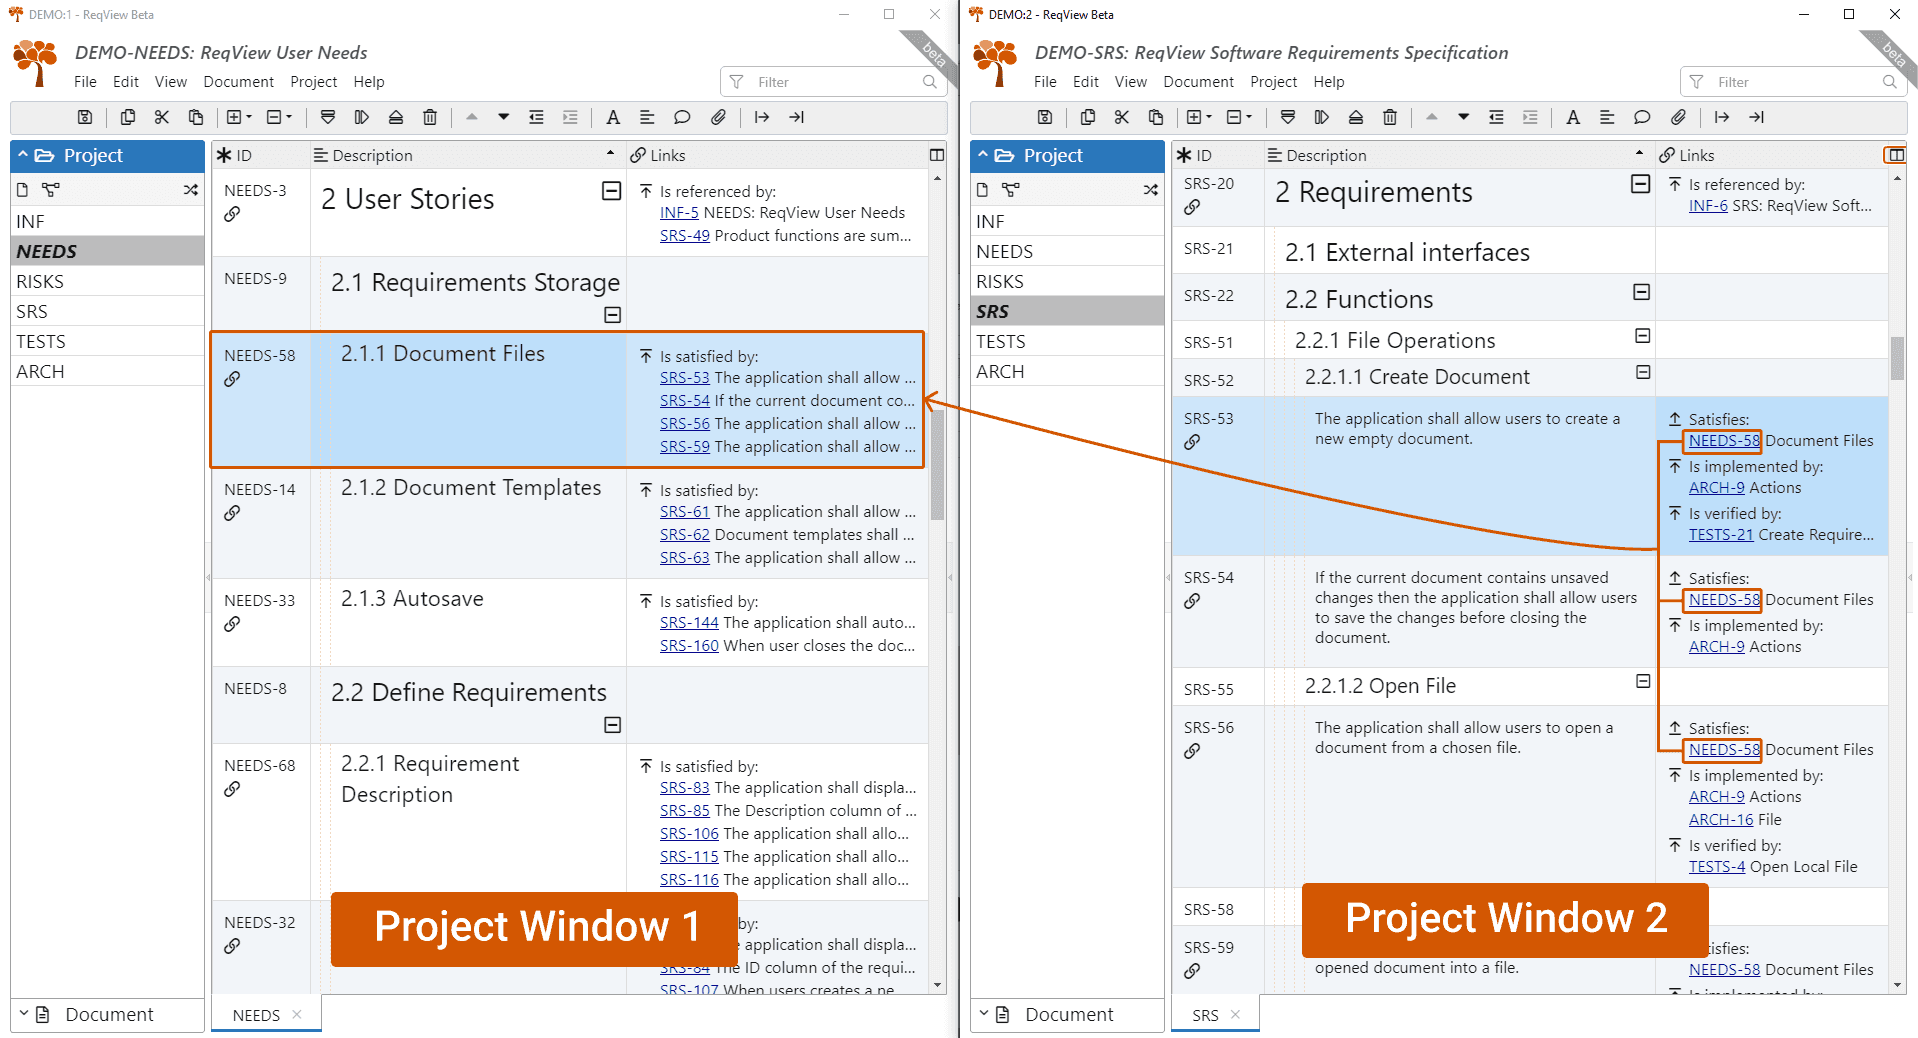 Working on different documents of the same project in multiple windows